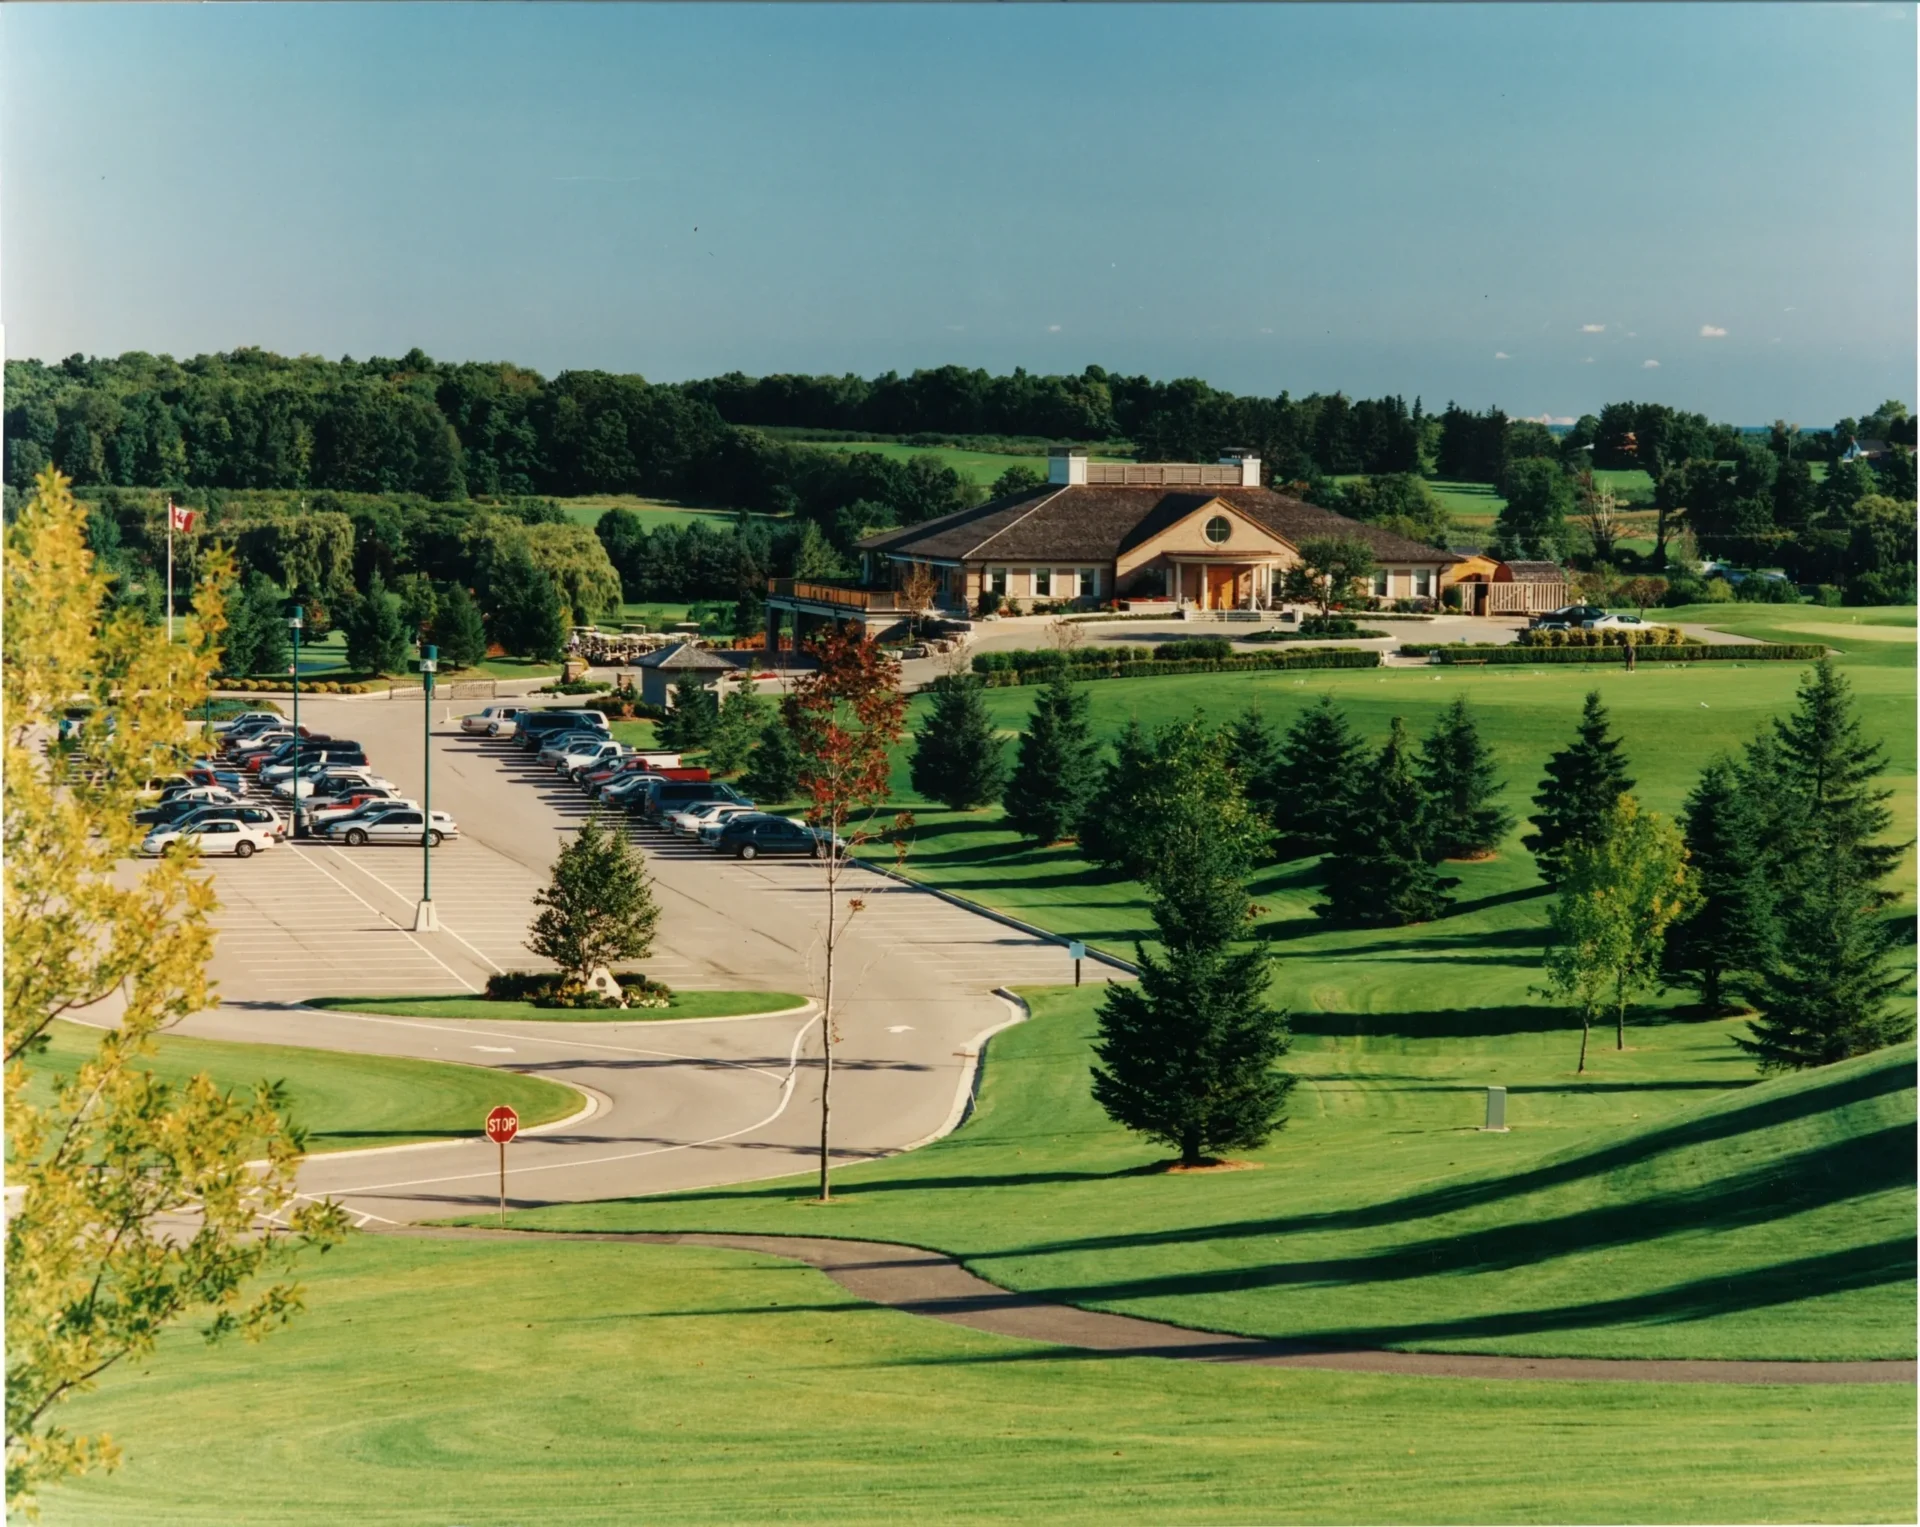 A view of a golf course with many trees.